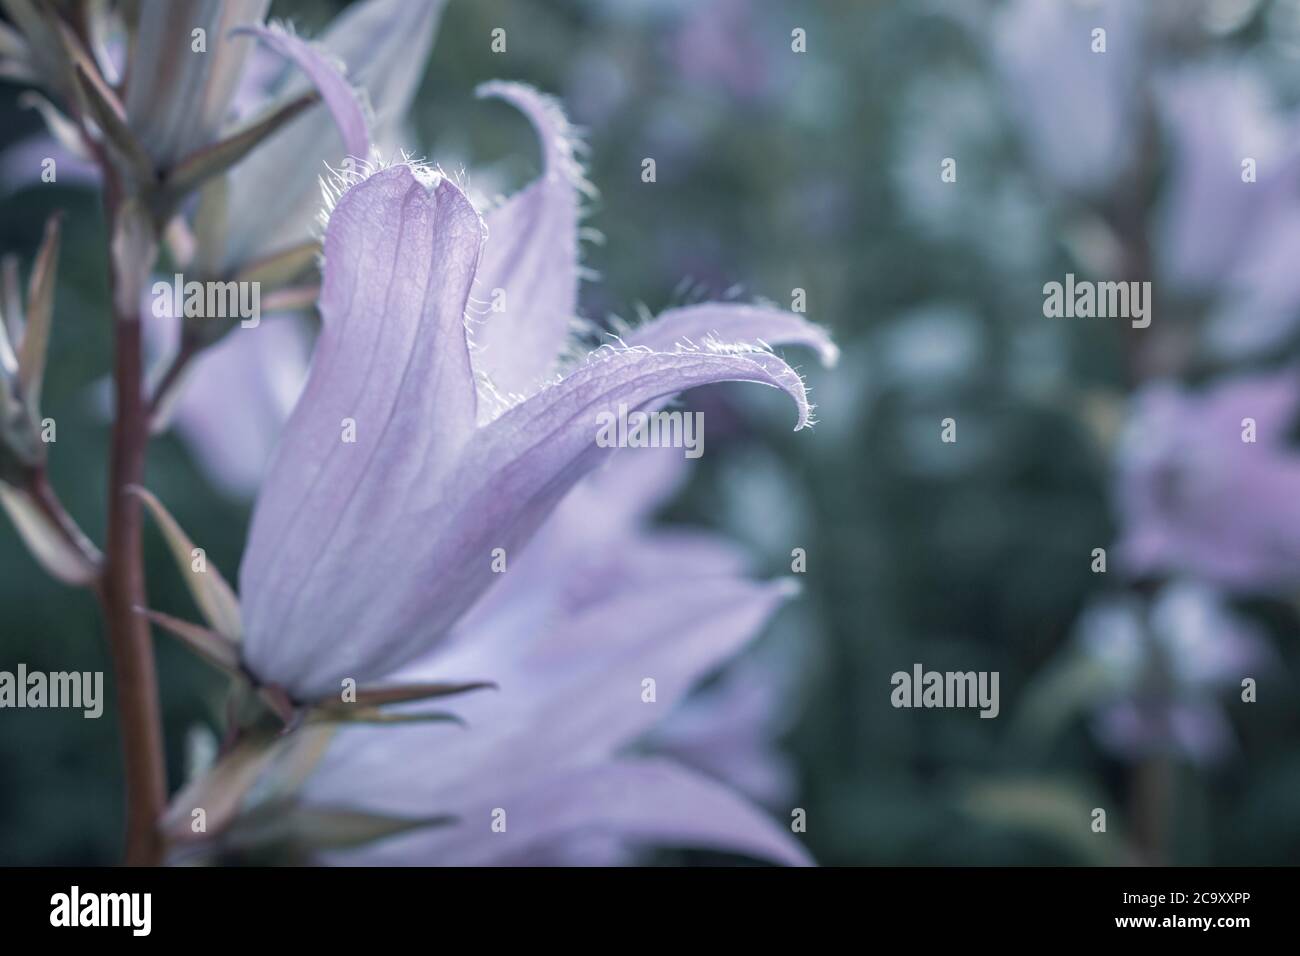 Campanula latifolia, the giant bellflower, is a species of bellflower in the family Campanulaceae. Stock Photo